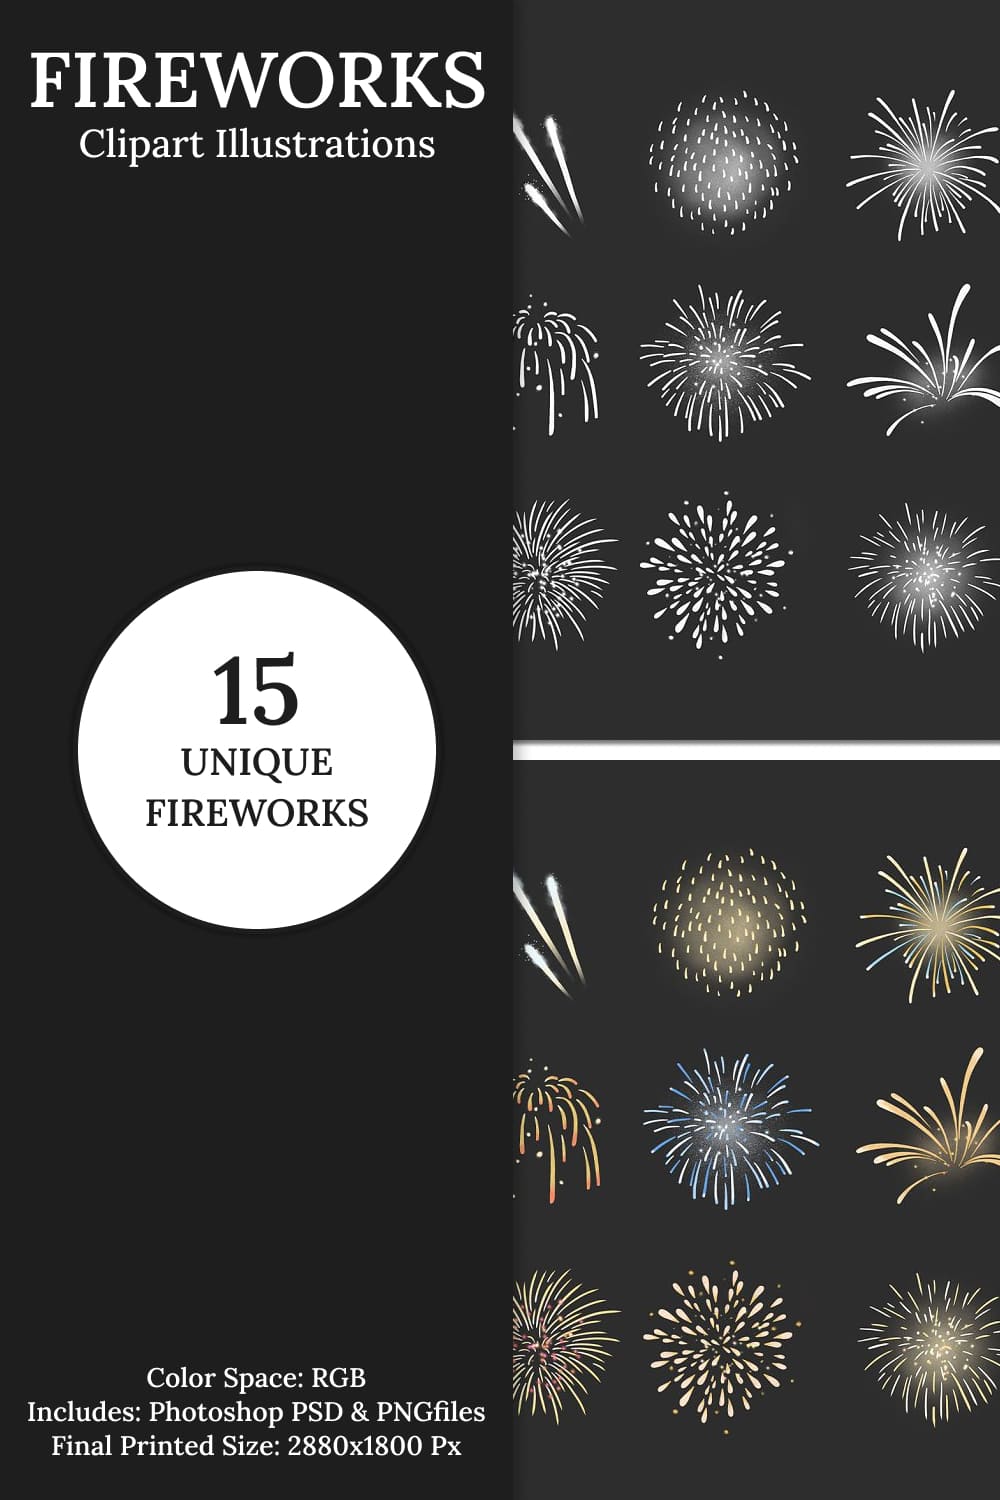 Fireworks Clipart Illustrations - Pinterest image preview.